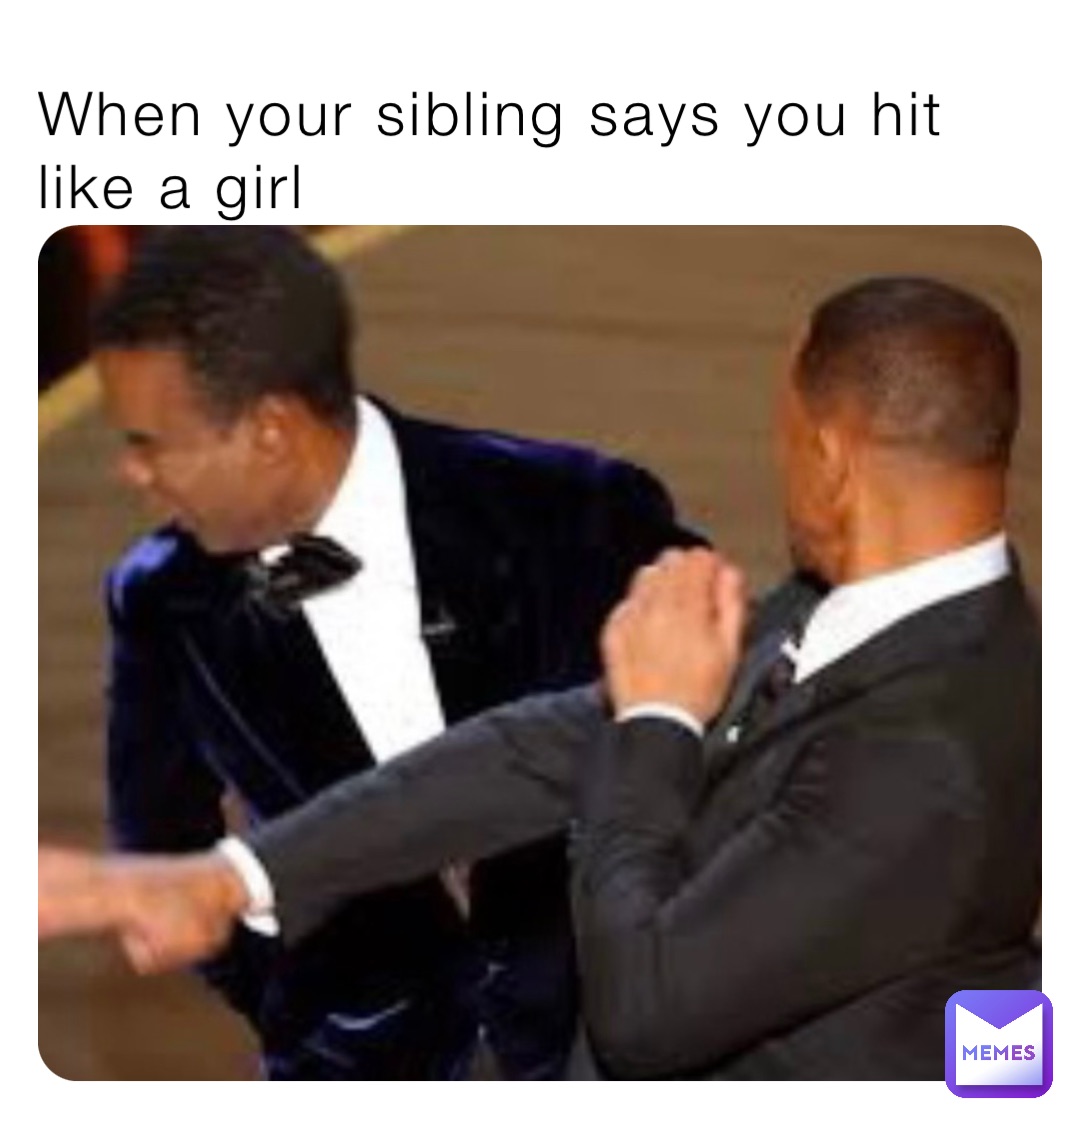 When your sibling says you hit like a girl